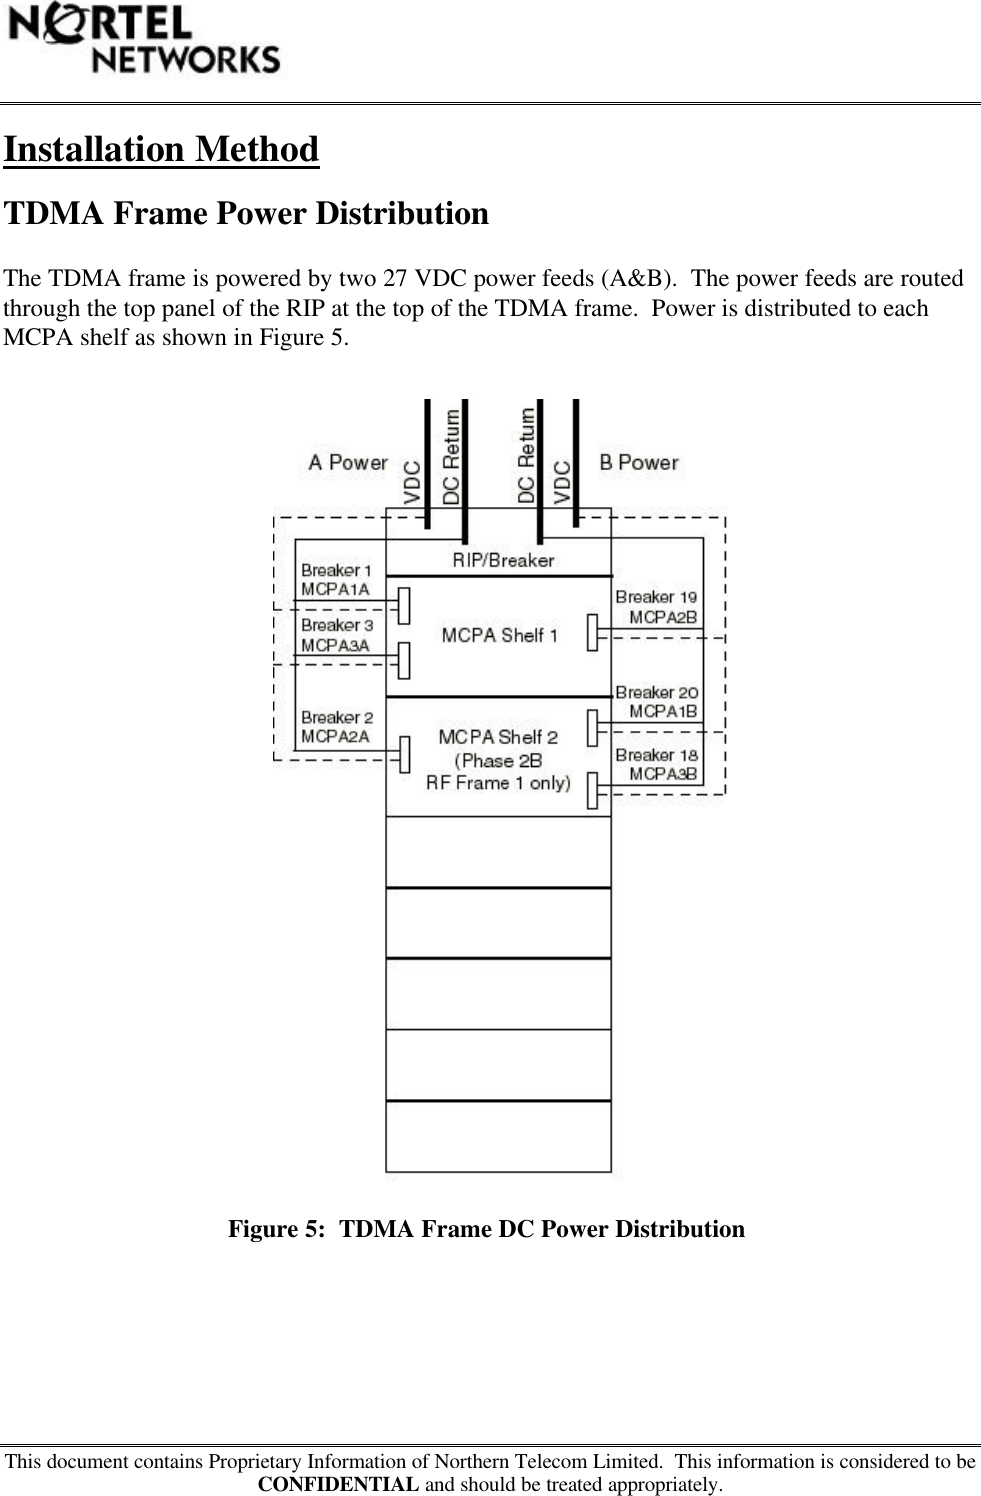 This document contains Proprietary Information of Northern Telecom Limited.  This information is considered to beCONFIDENTIAL and should be treated appropriately.Installation MethodTDMA Frame Power DistributionThe TDMA frame is powered by two 27 VDC power feeds (A&amp;B).  The power feeds are routedthrough the top panel of the RIP at the top of the TDMA frame.  Power is distributed to eachMCPA shelf as shown in Figure 5.Figure 5:  TDMA Frame DC Power Distribution